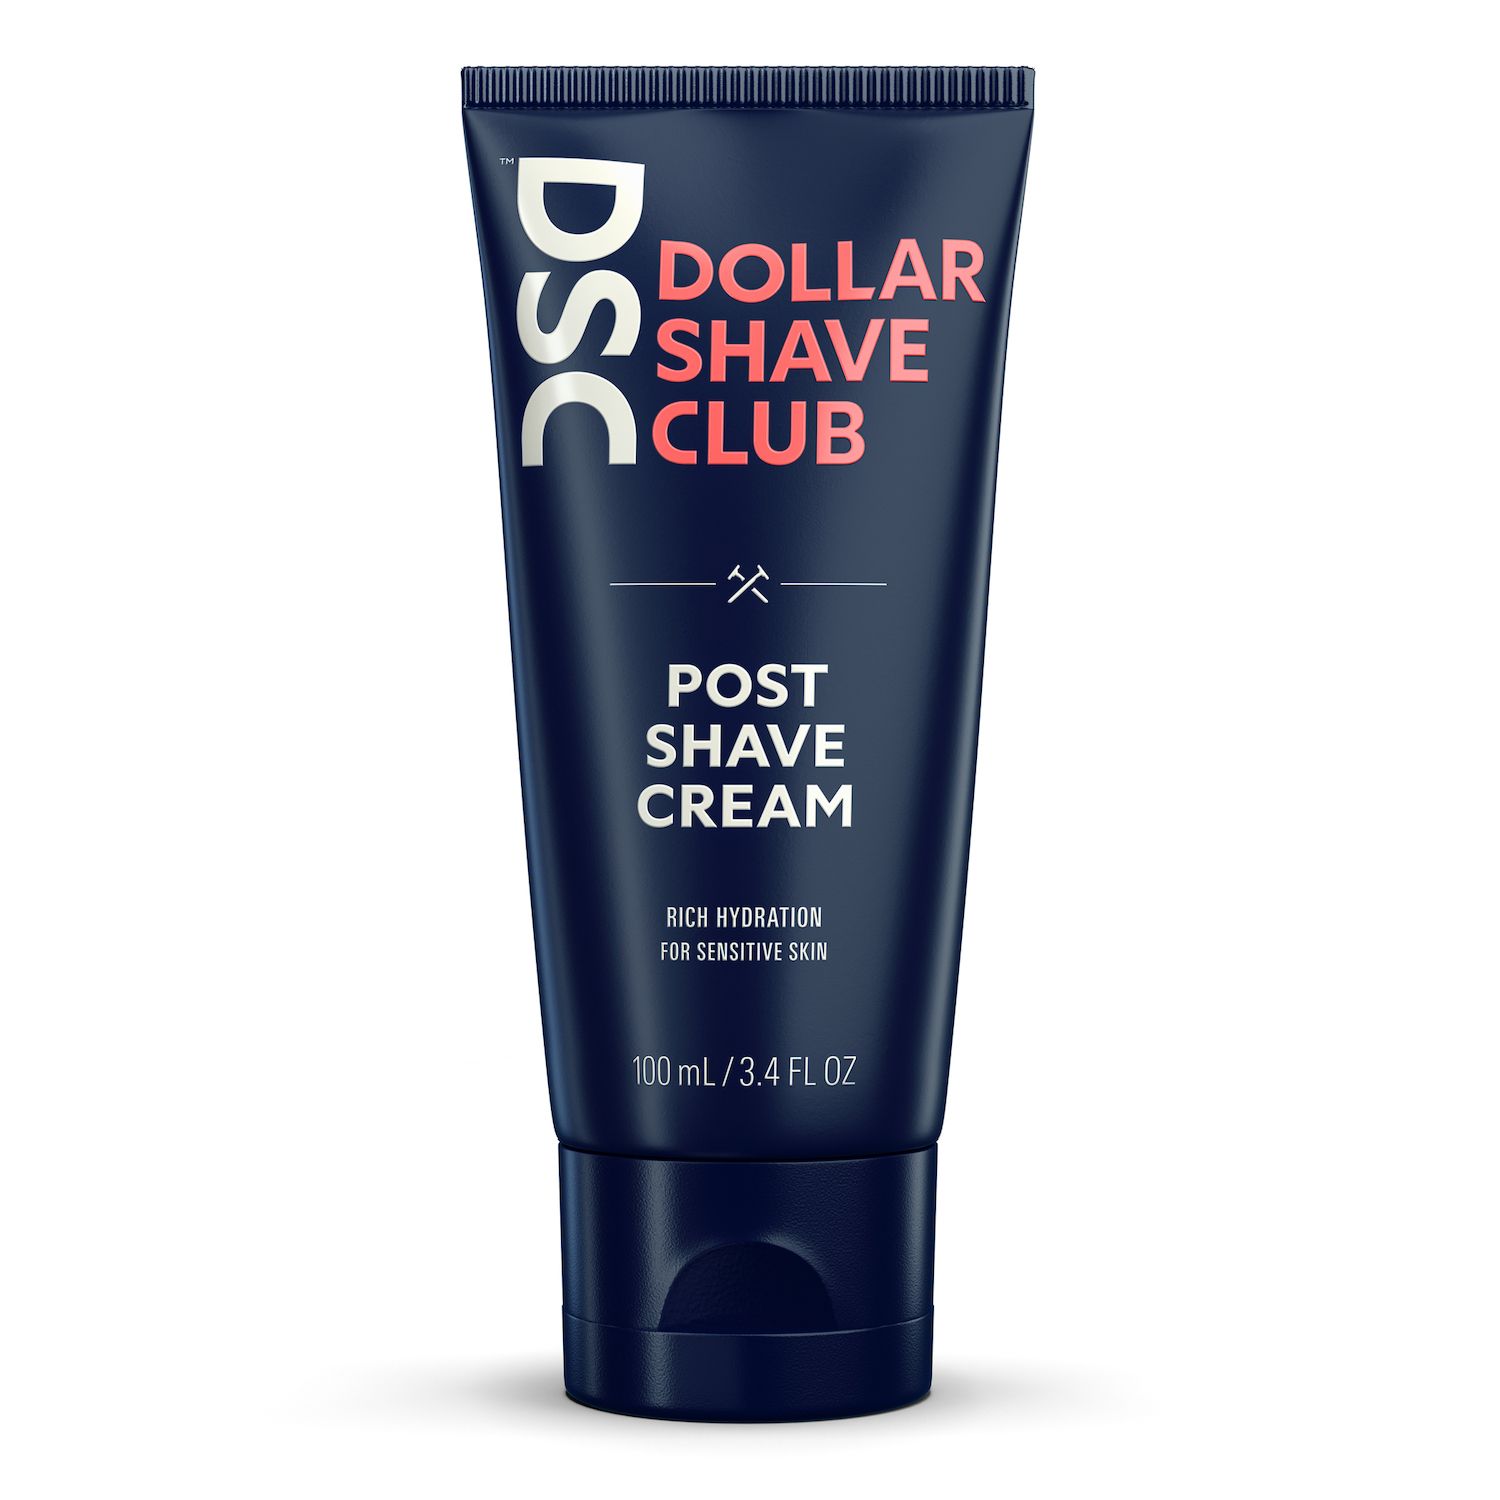 Image for Dollar Shave Club Post Shave Cream 3.4 oz. at Kohl's.